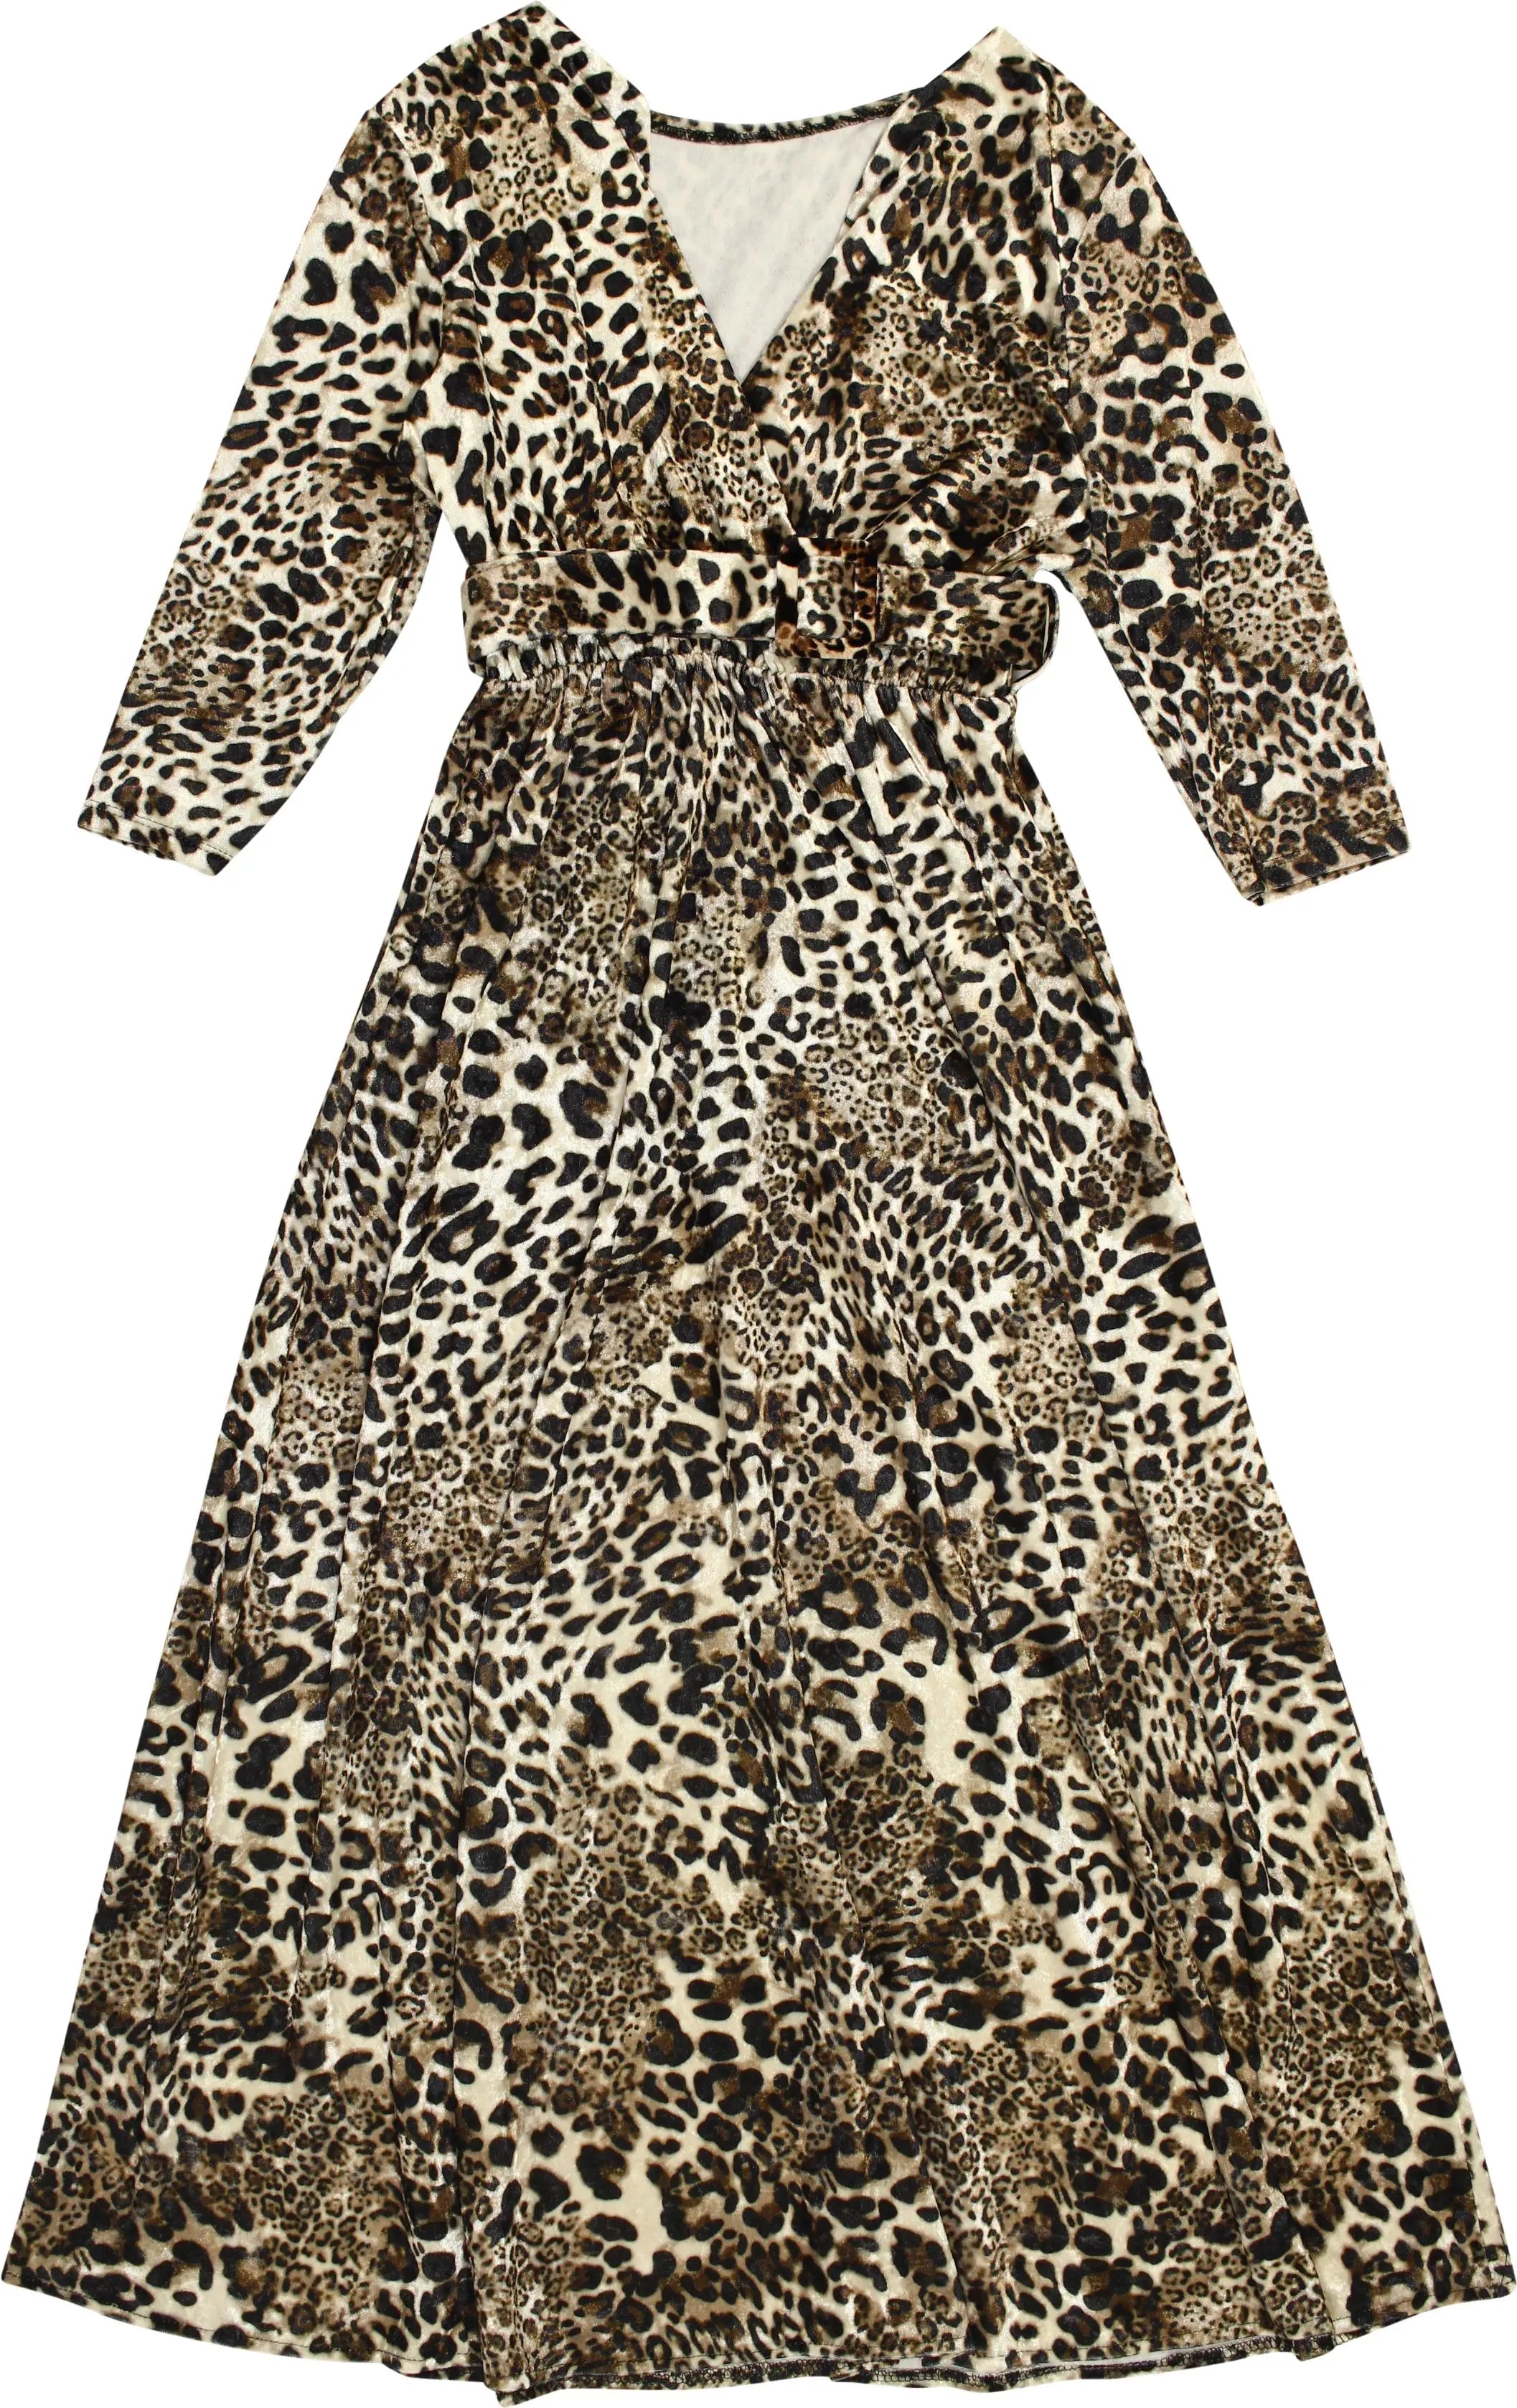 Unknown - Velvet Dress with Animal Print- ThriftTale.com - Vintage and second handclothing